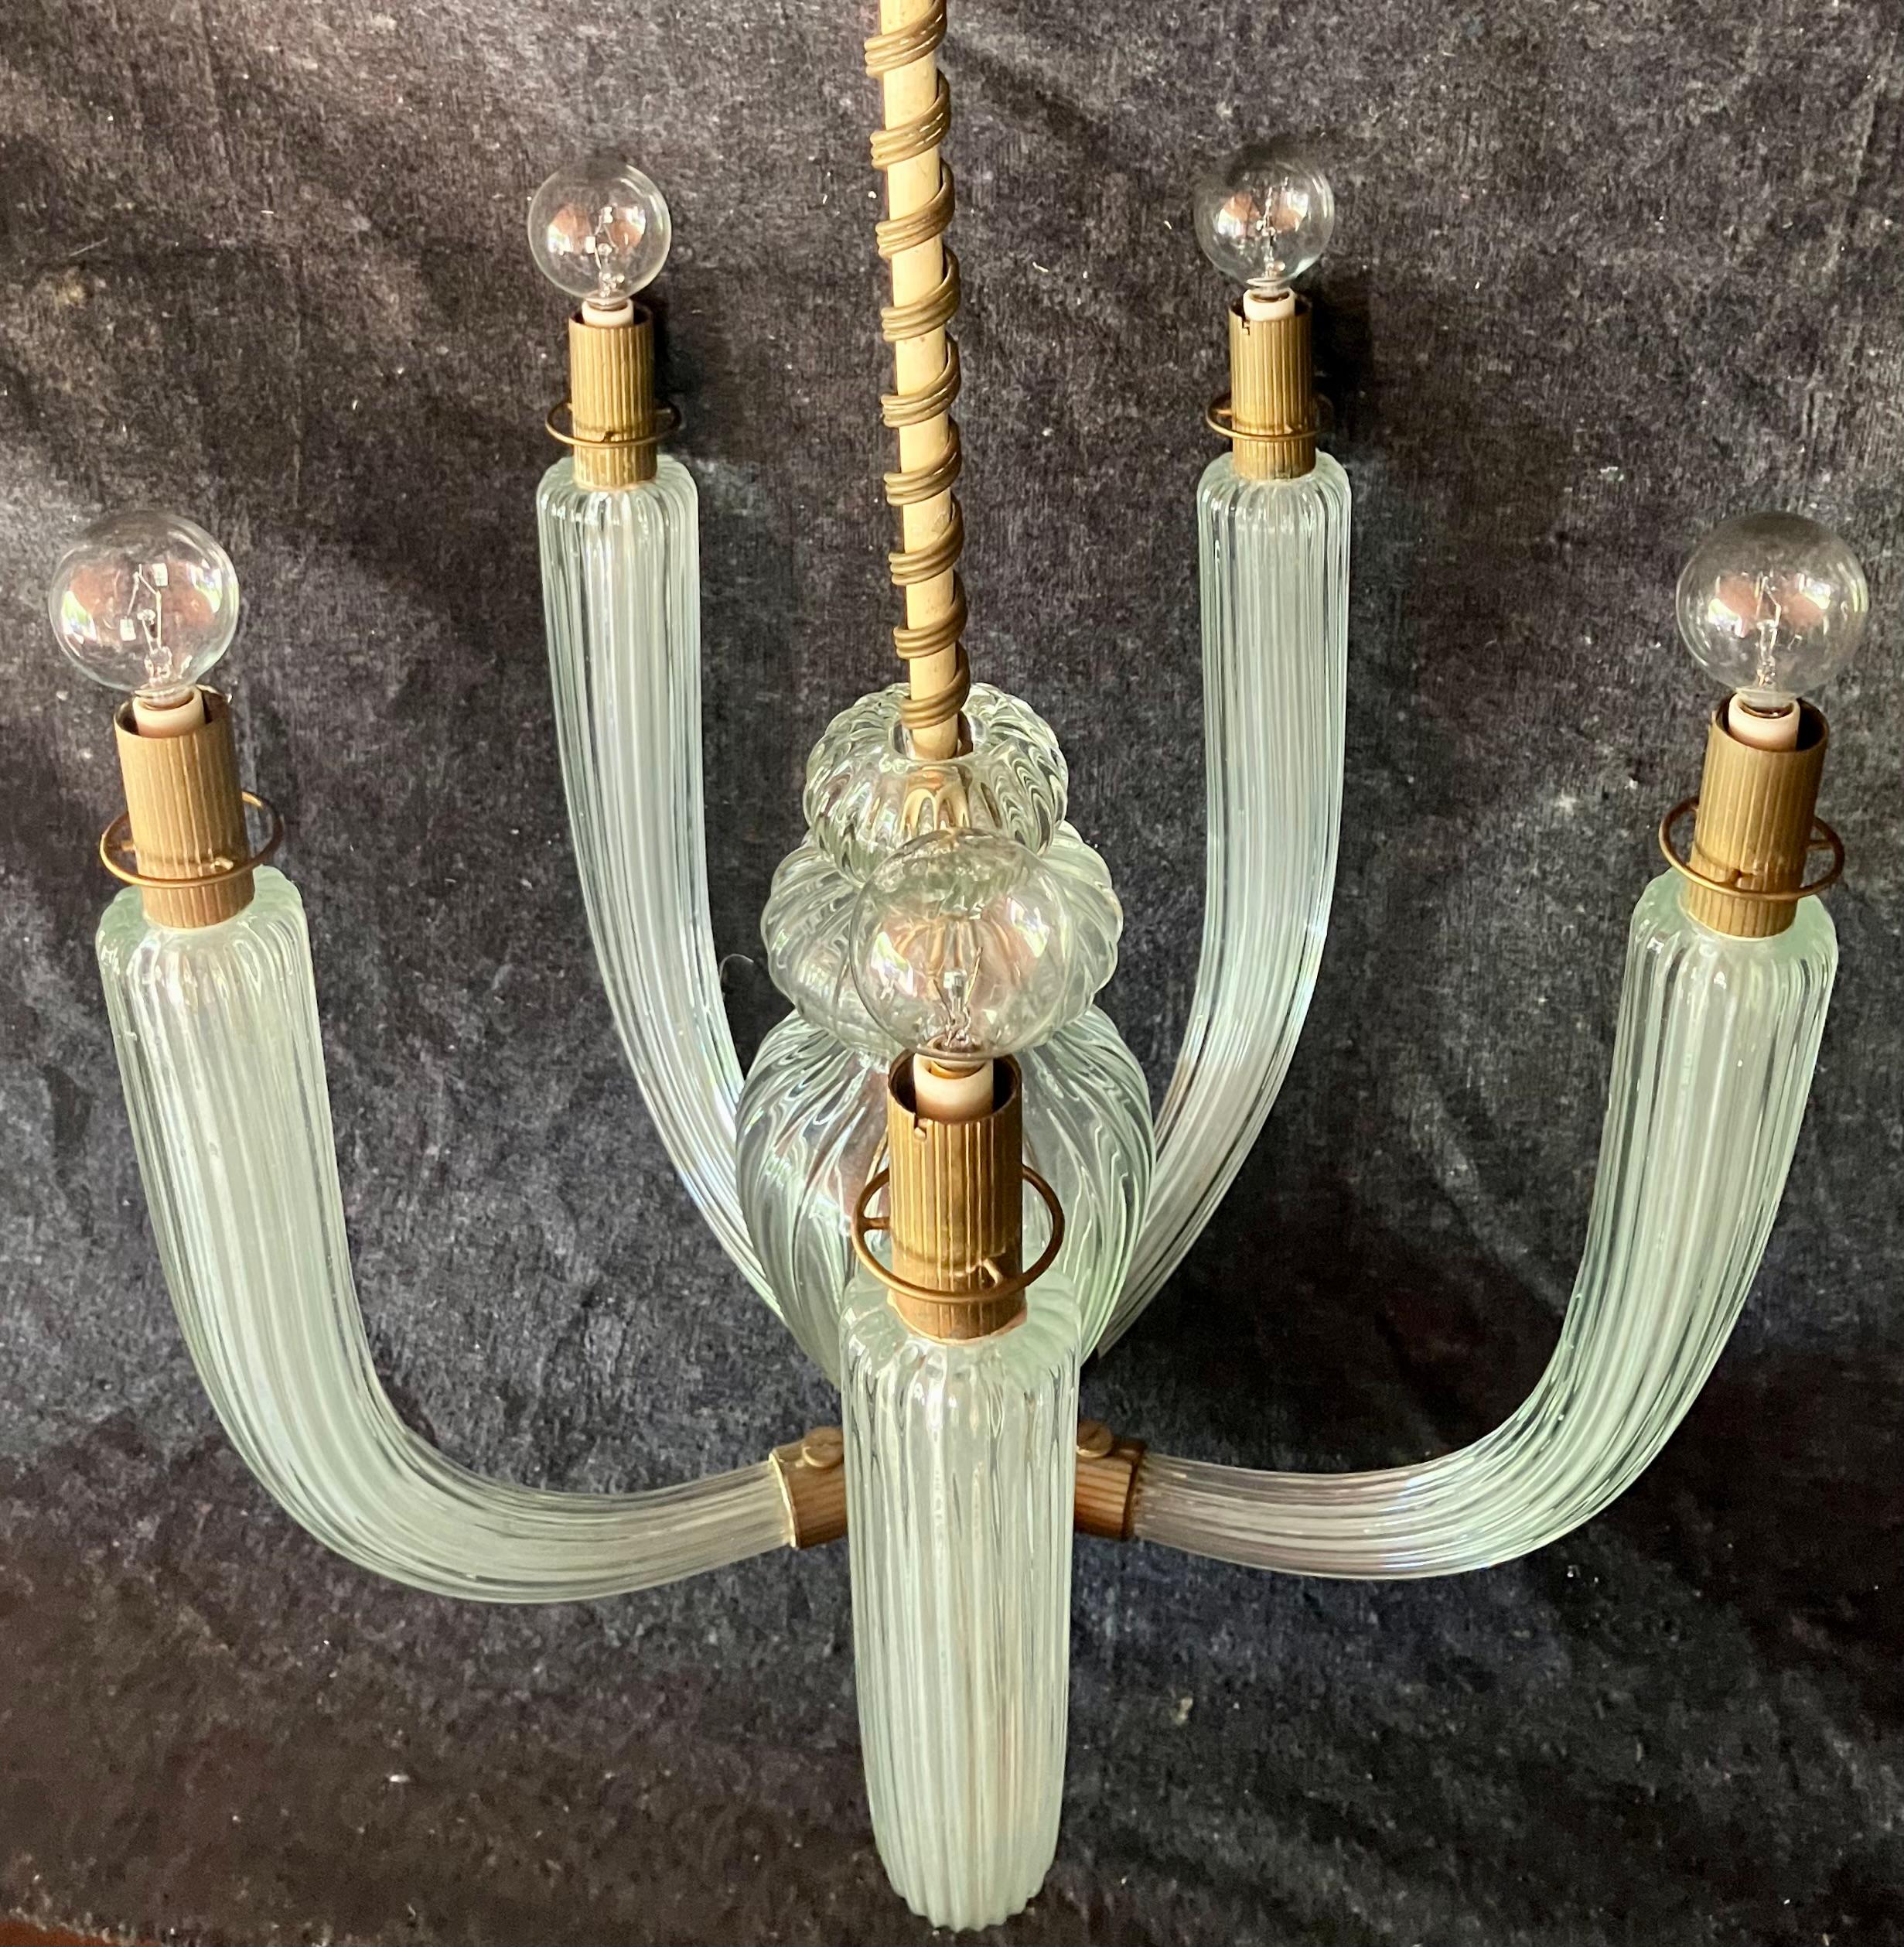 Five light Murano Chandelier. Five arm moderne pendant in palest green reeded glass with central baluster issuing coiled brass on white painted metal stem spiraling up to gold painted and reeded metal  canopy. Lacking original glass globes. Carlo